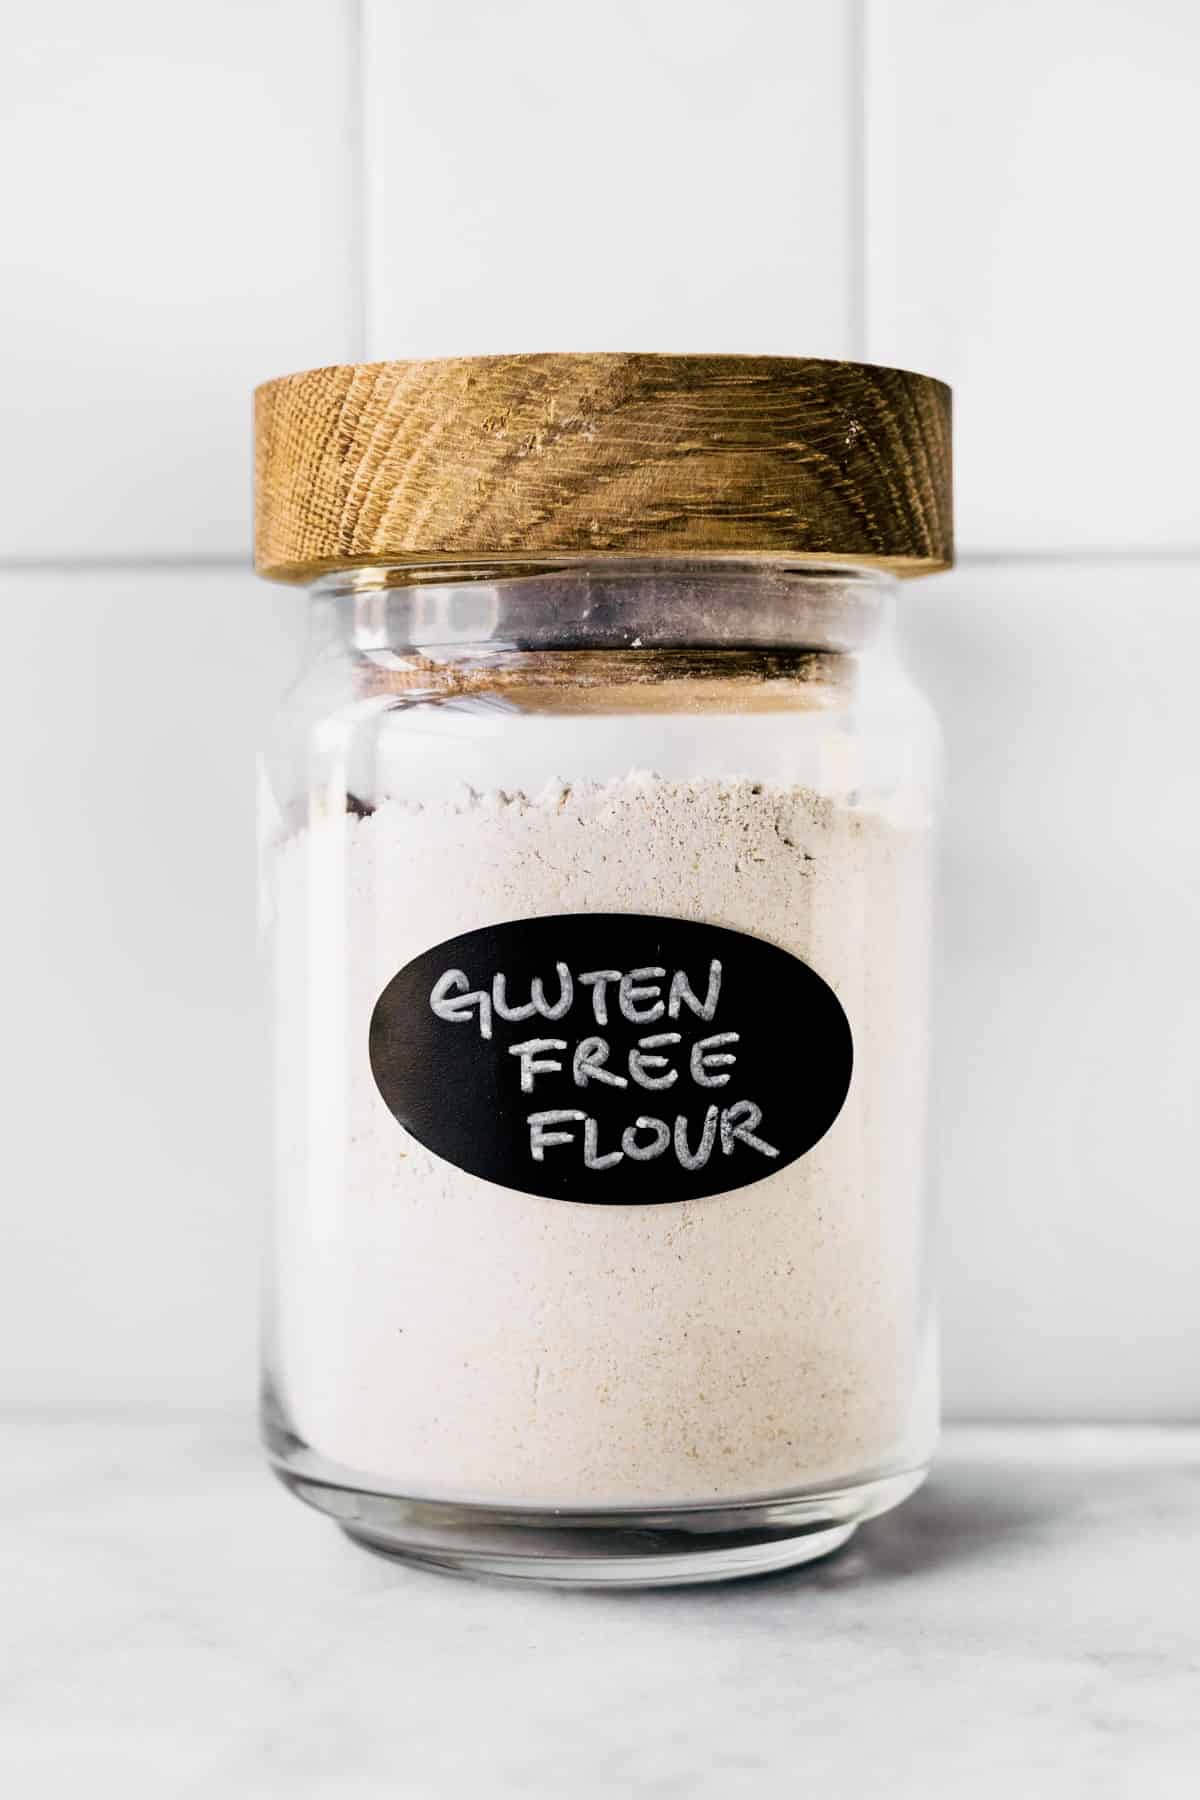 A jar of homemade gluten free flour blend with a wooden lid and black label.